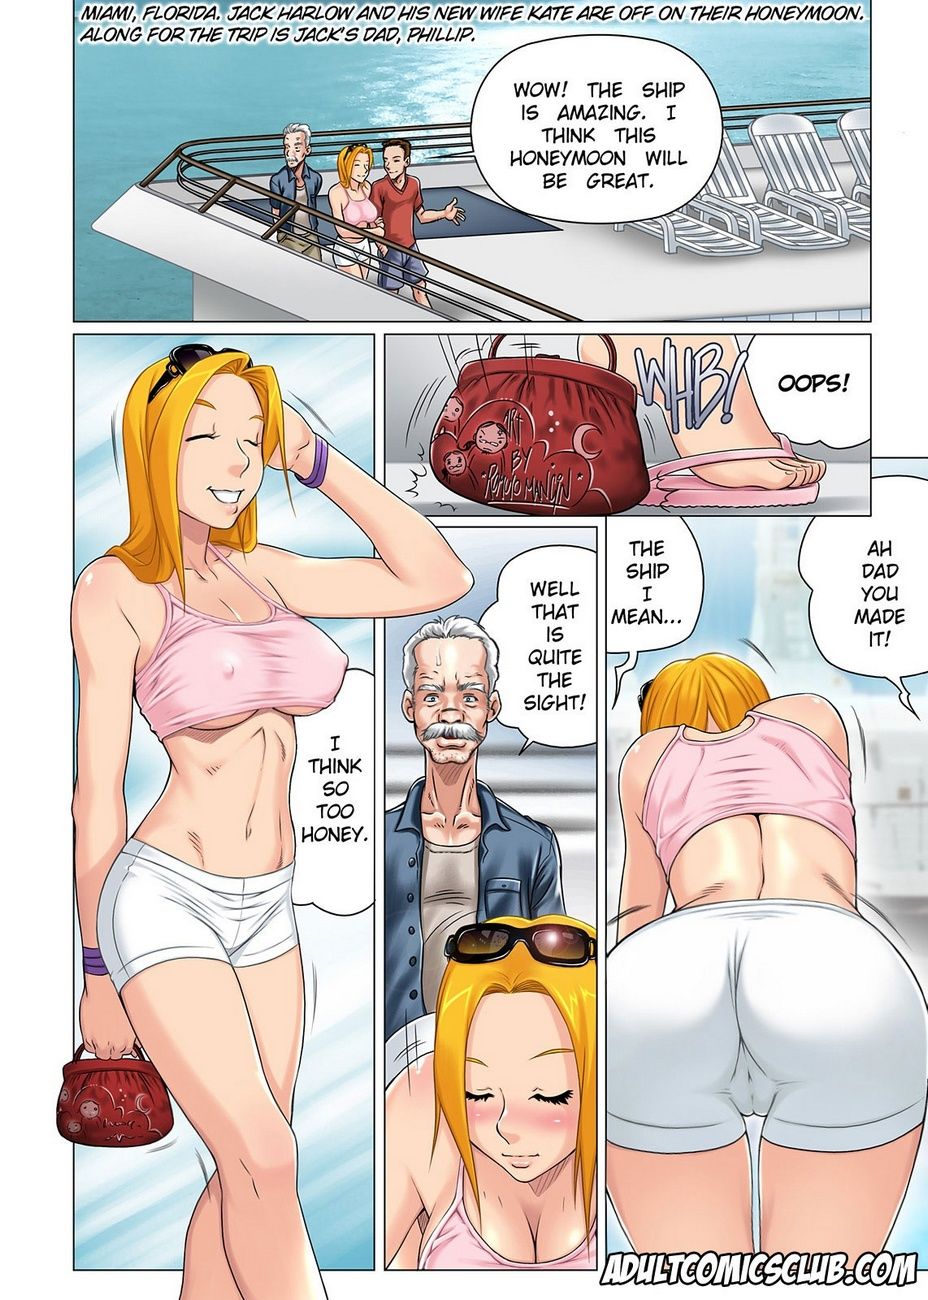 Another Horny Father In Law page 1